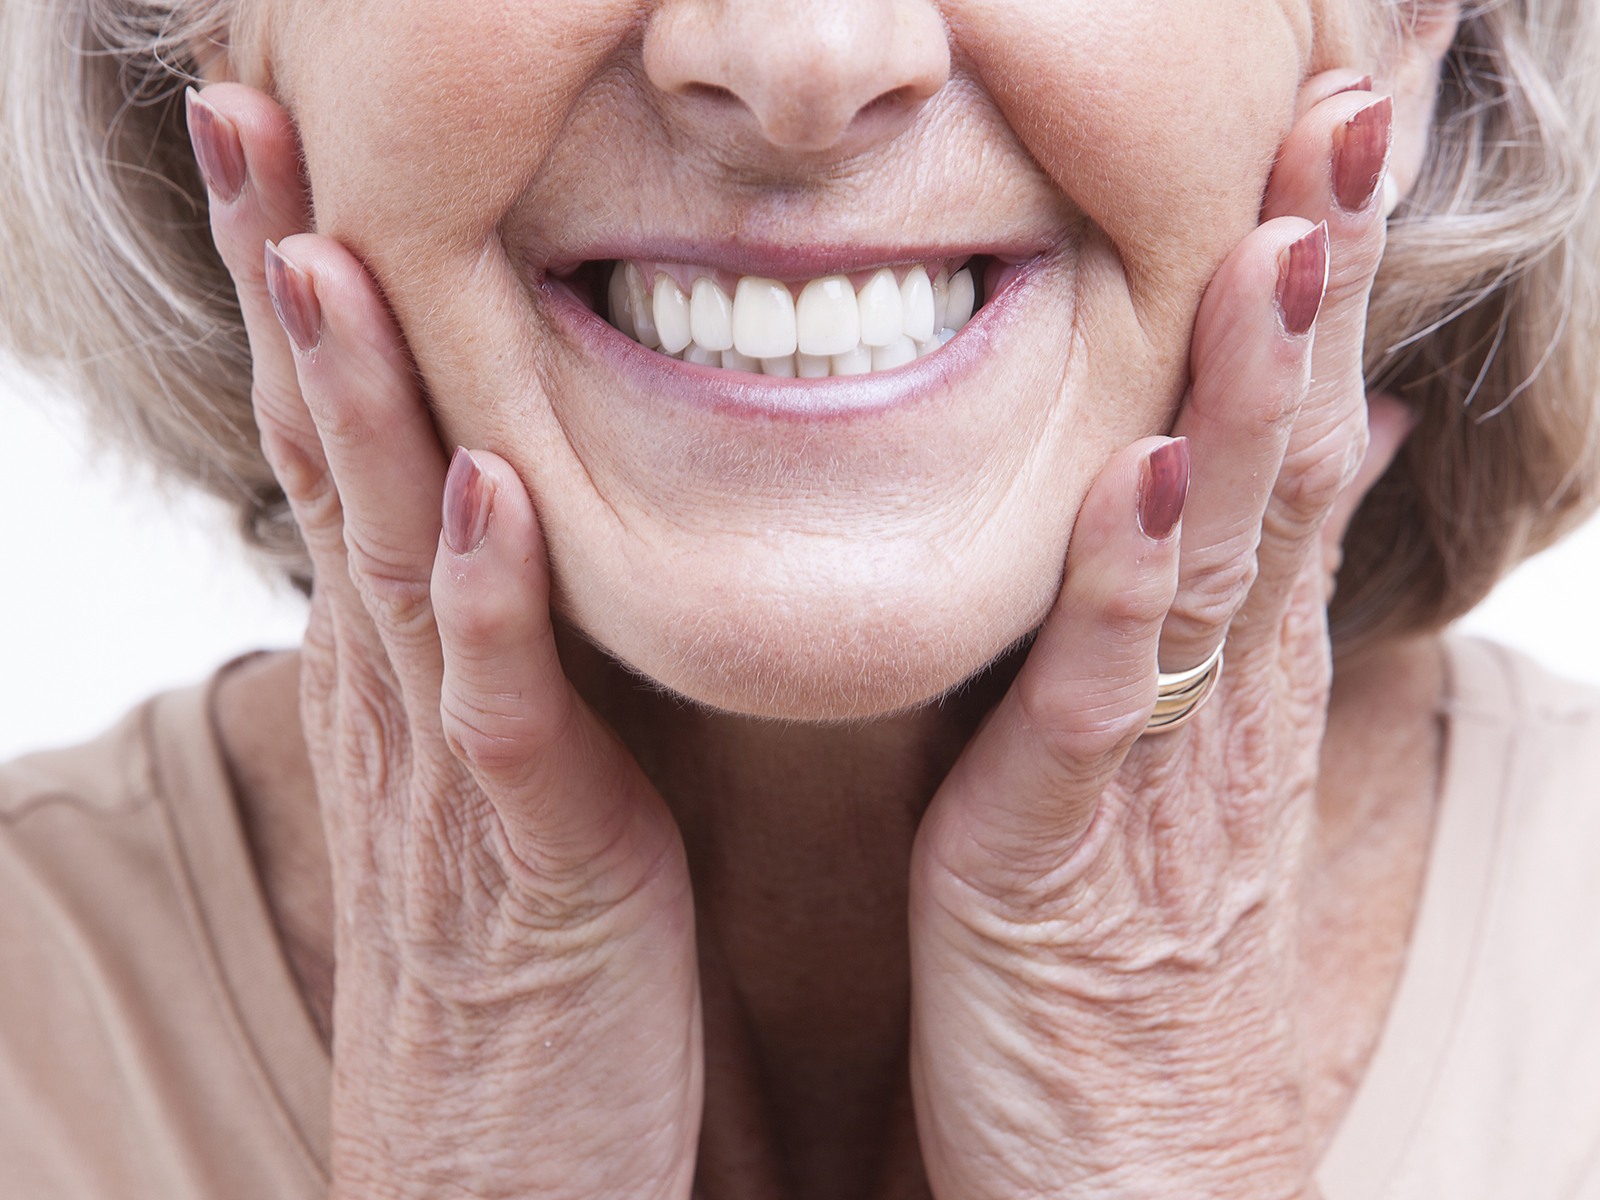 Will Dentures age my face?